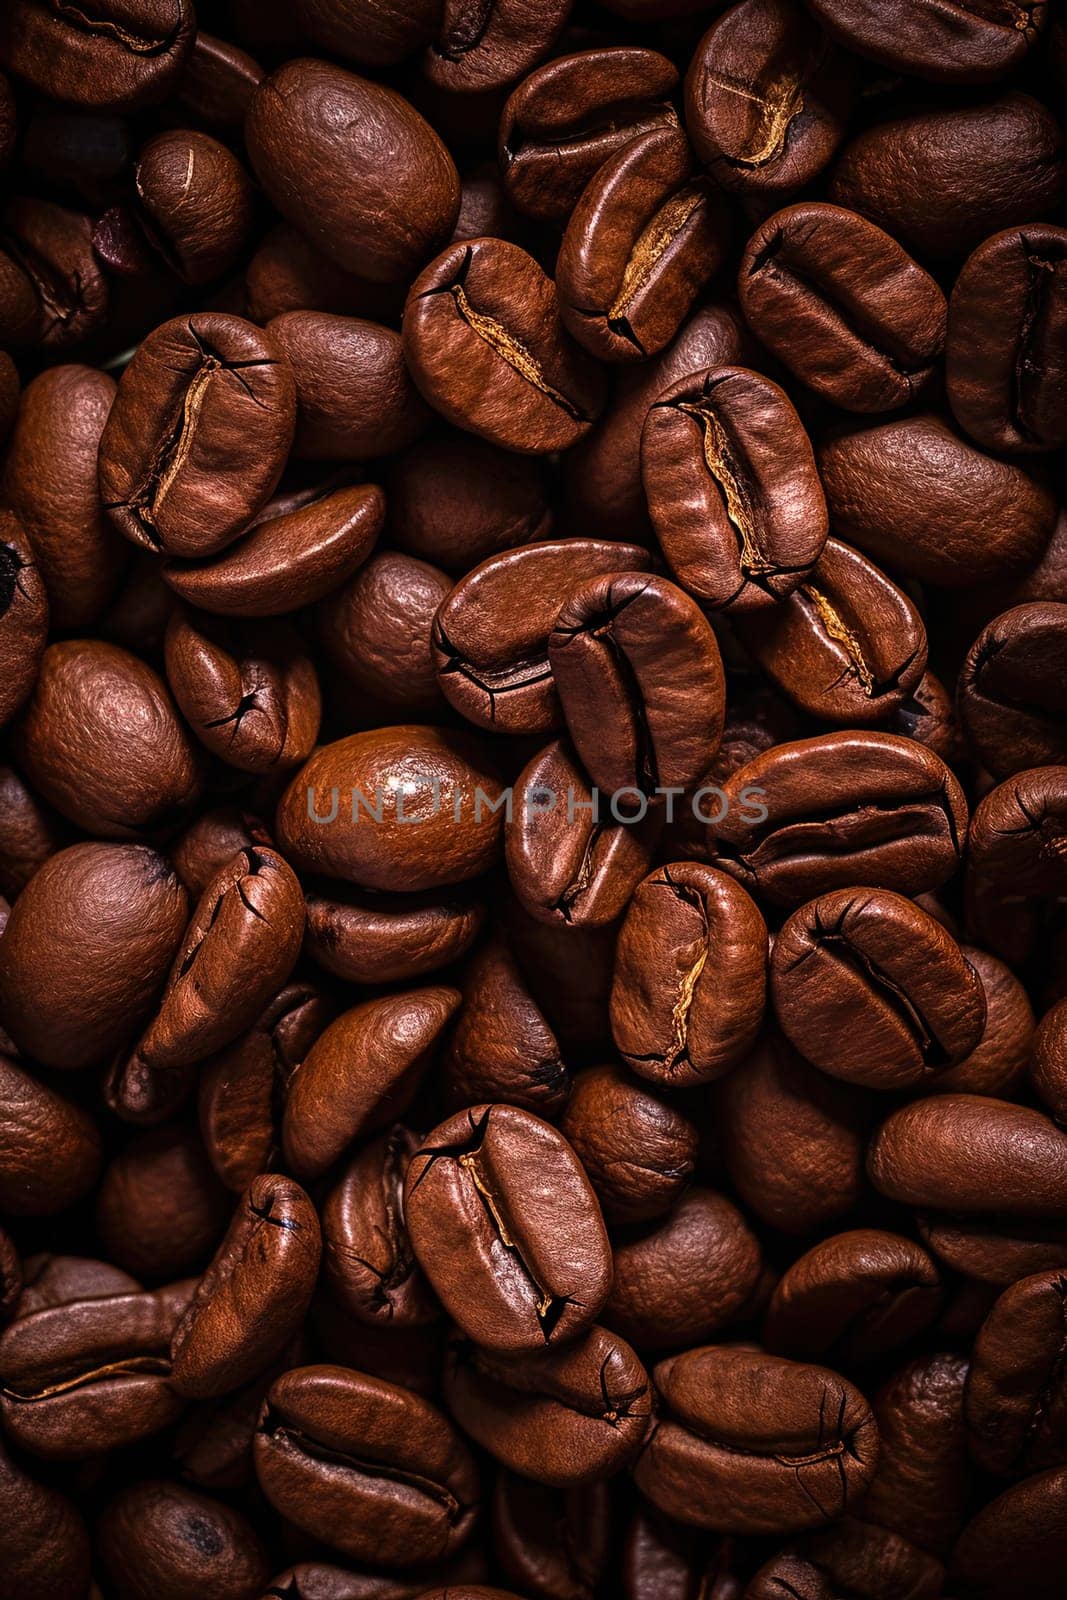 Texture of raw coffee beans close up. by Yurich32